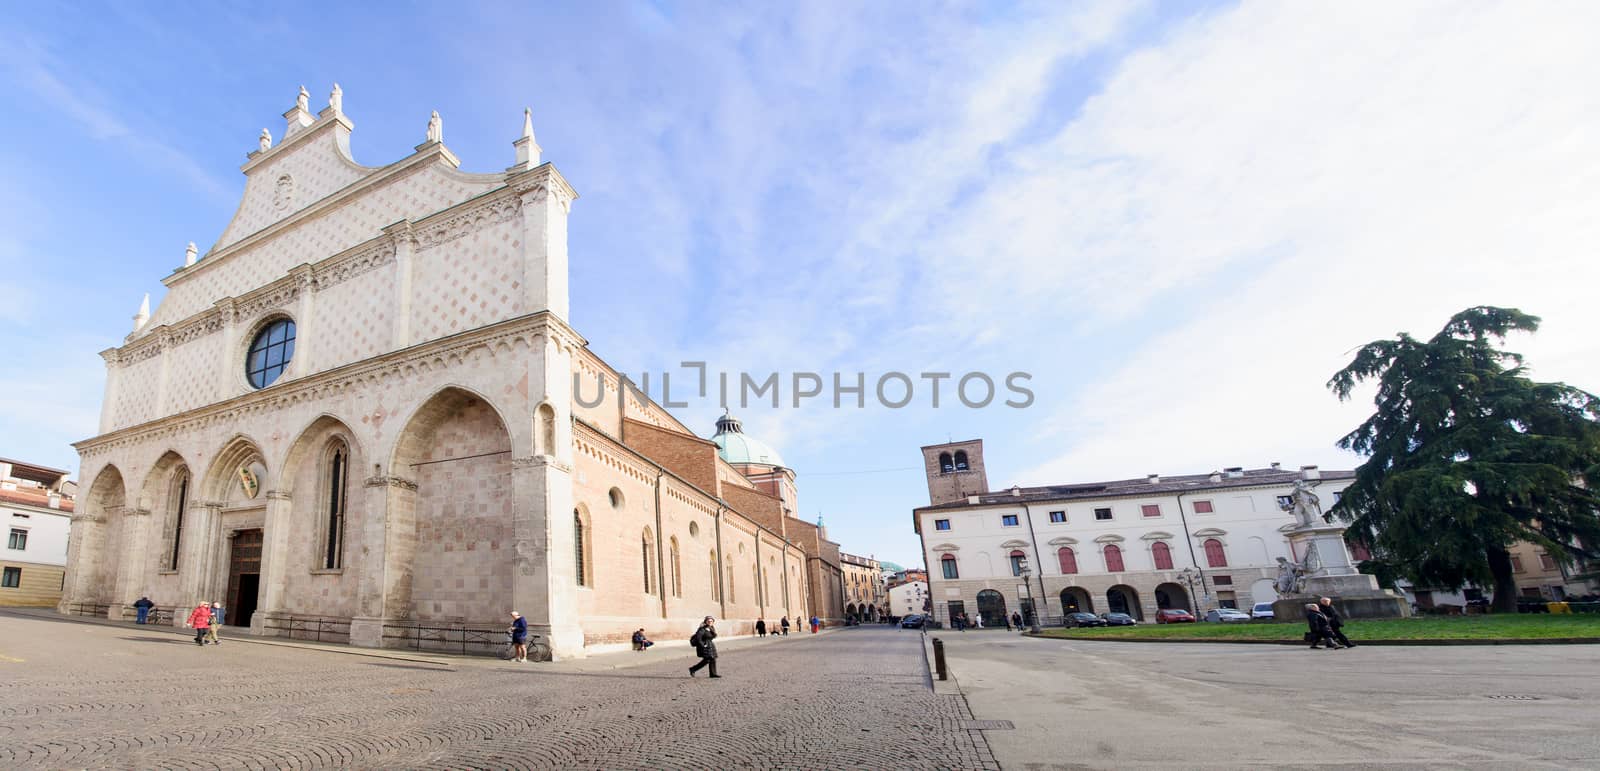 VICENZA, ITALY - JAN 31, 2015: Scene of Piazza del Duomo (Cathedral Square), with local and tourists, in Vicenza, Veneto, Italy